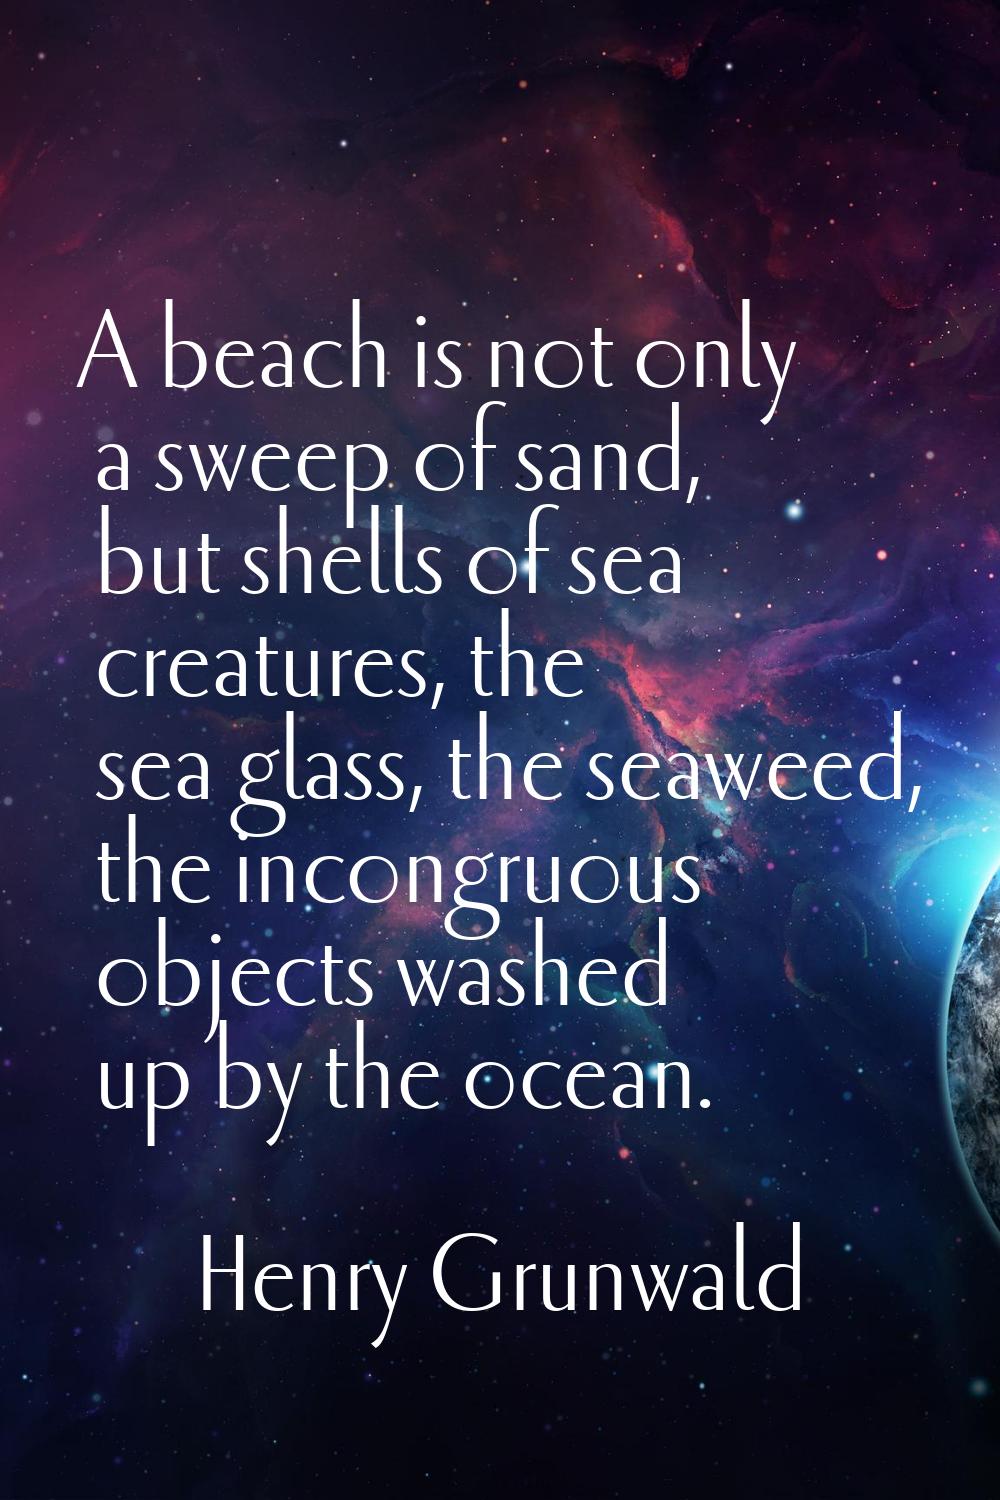 A beach is not only a sweep of sand, but shells of sea creatures, the sea glass, the seaweed, the i